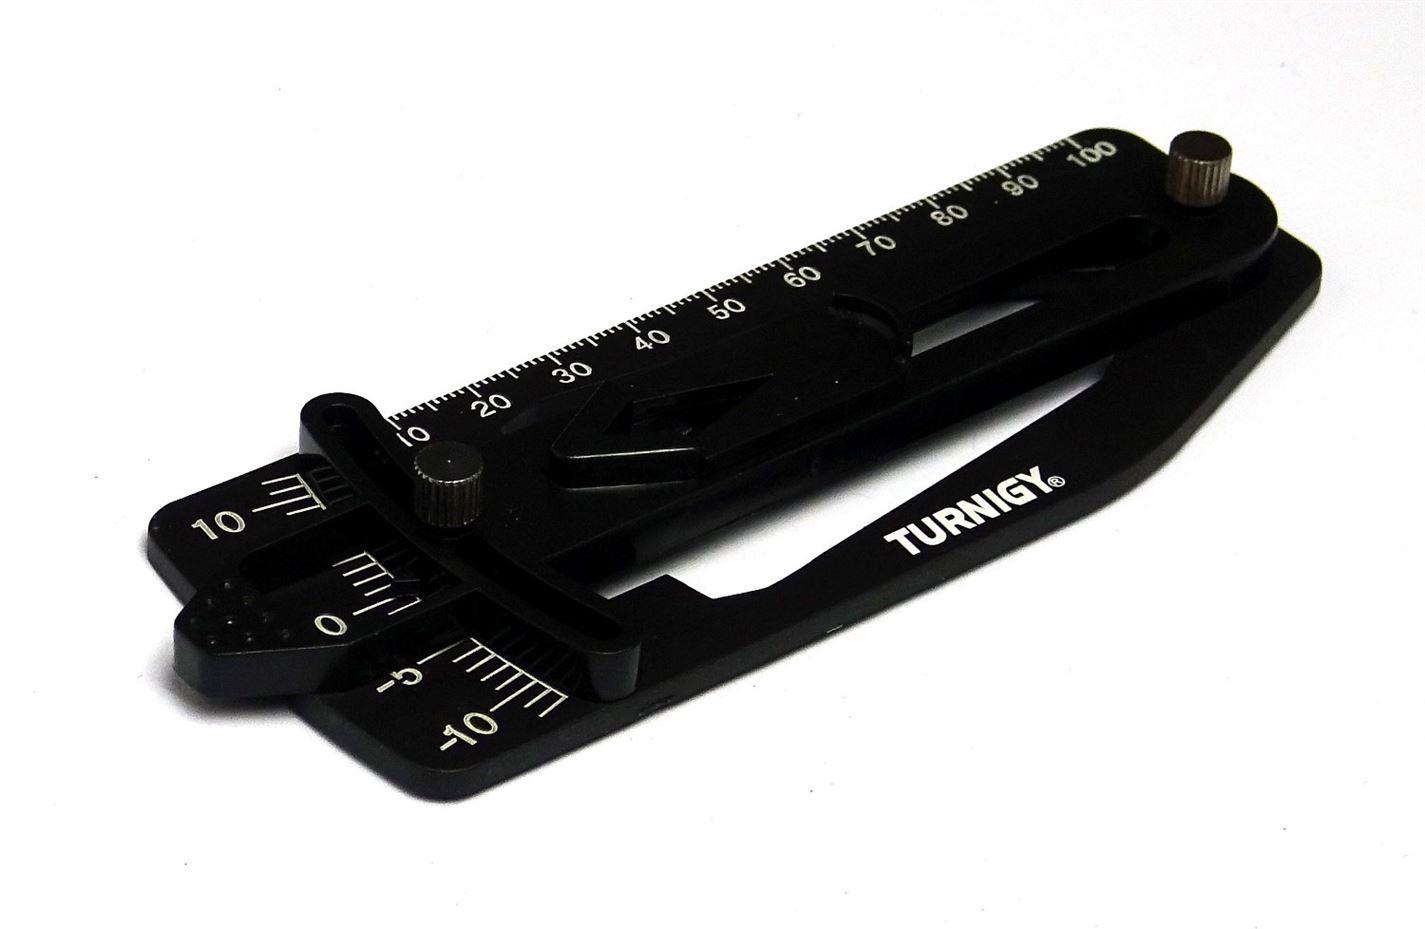 Turnigy RC Helicopter Pitch Gauge Tool Measuring - UK Seller